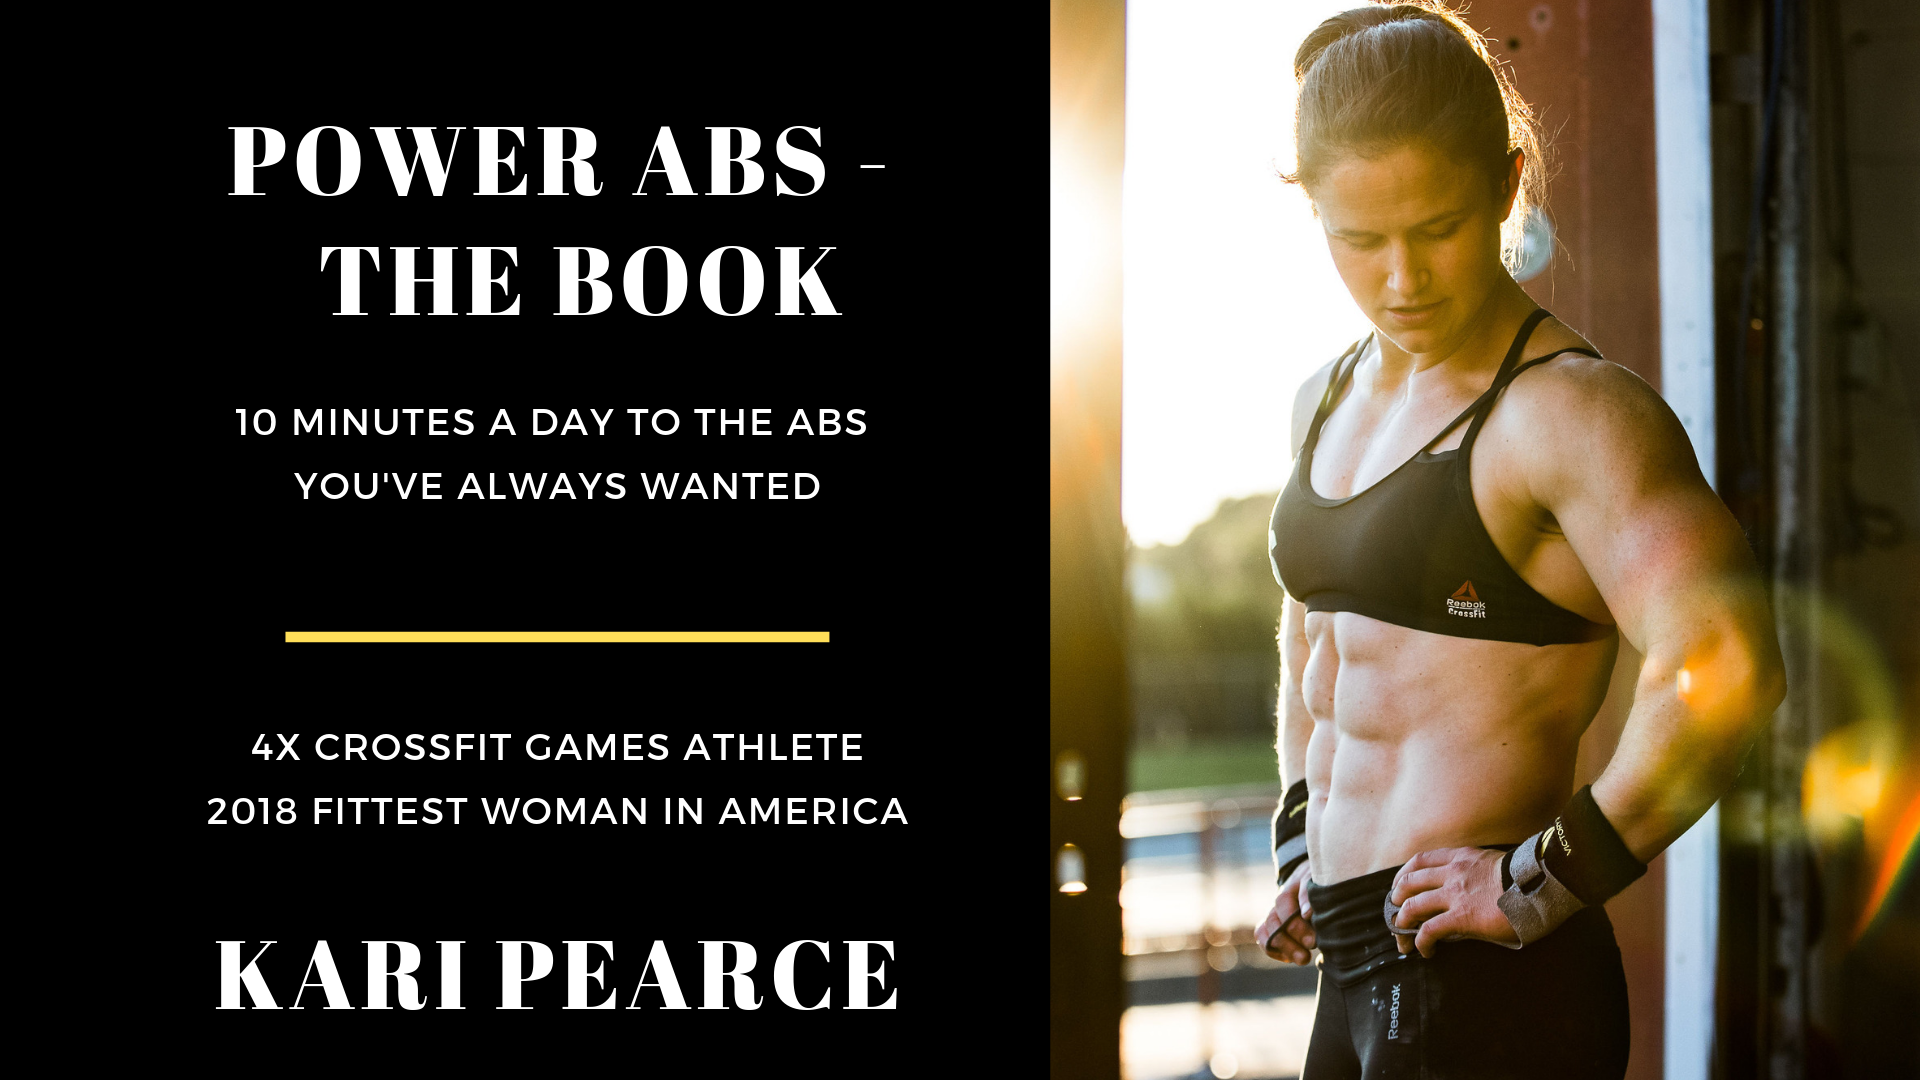 PowerAbs - The Book